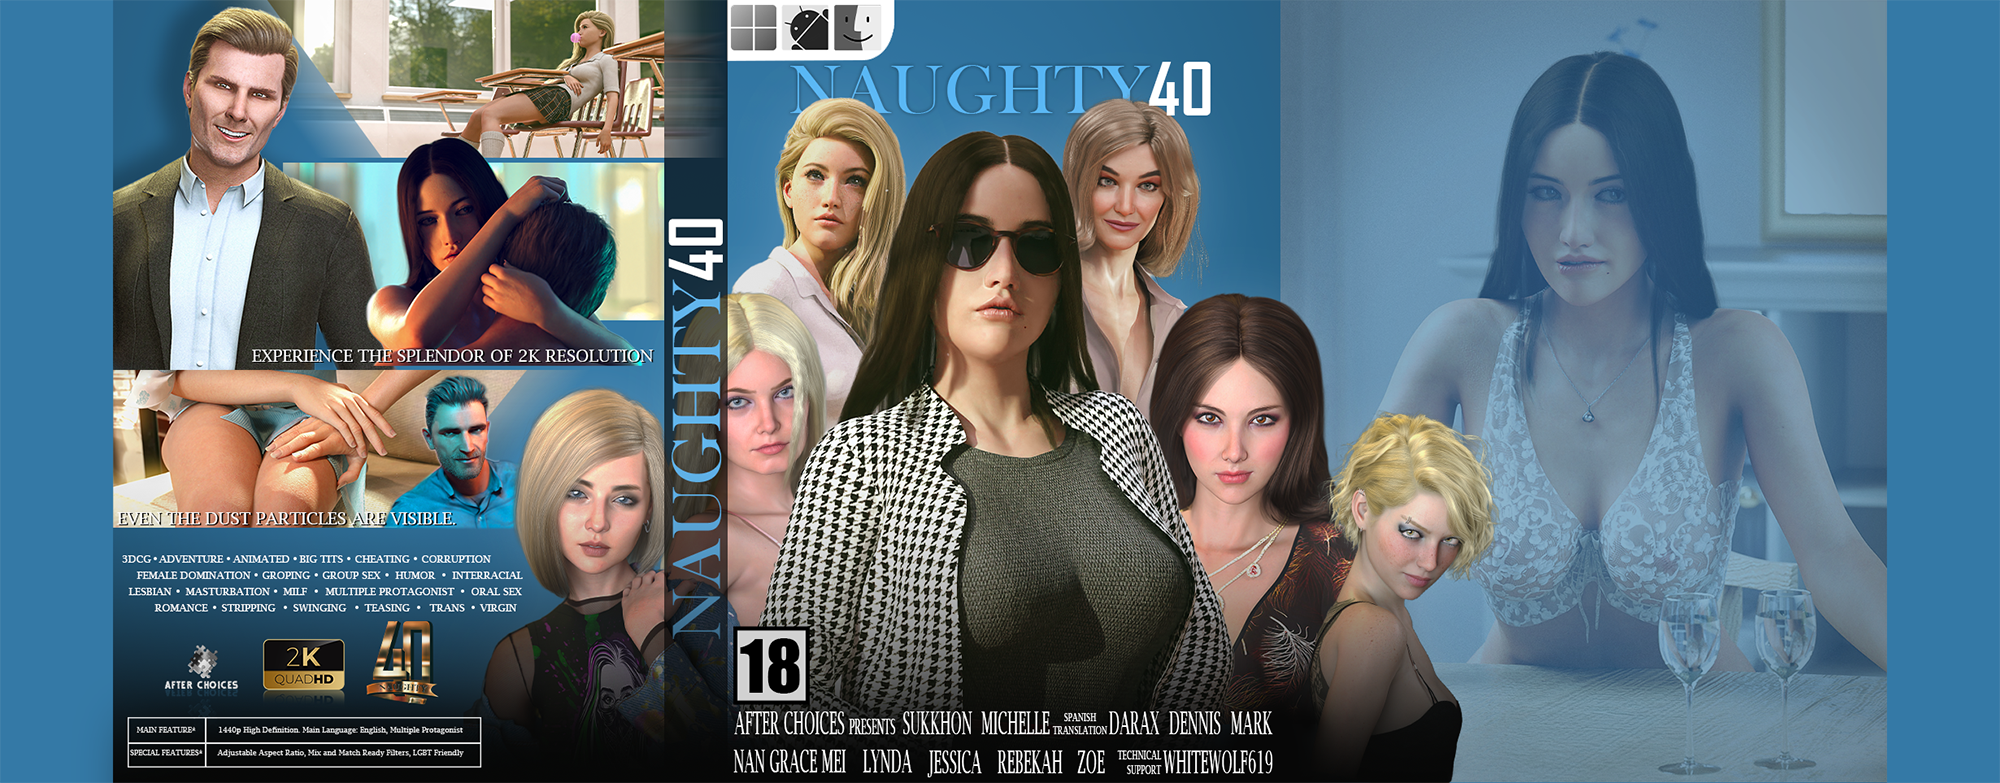 Naughty 40 (Adult Game) - Release Announcements pic